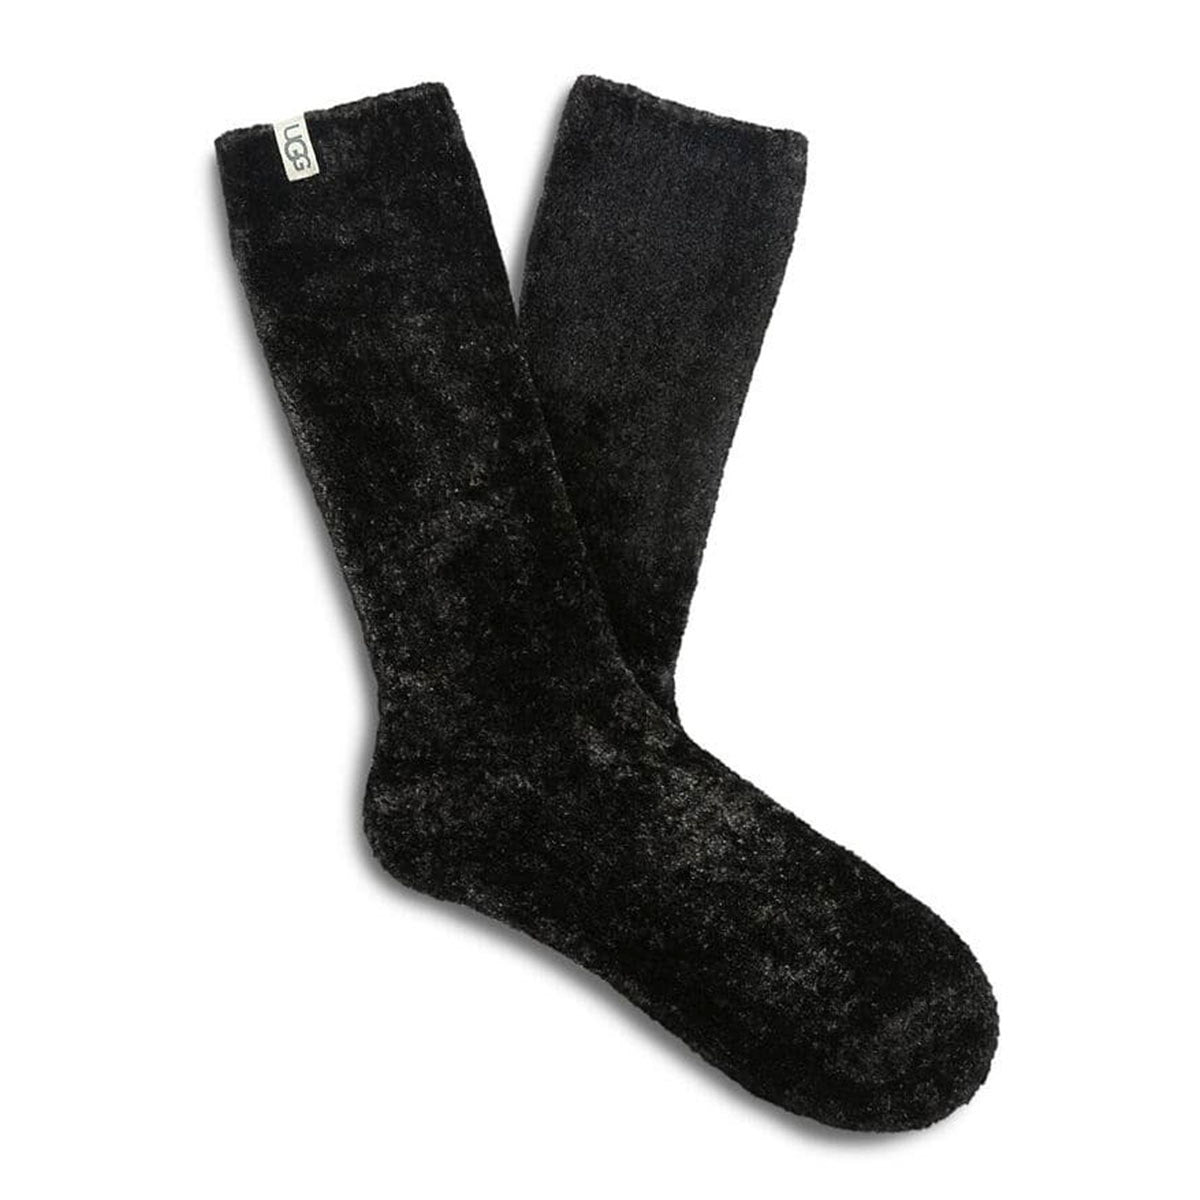 A pair of UGG LEDA COZY SOCK BLACK women's socks isolated on a white background.